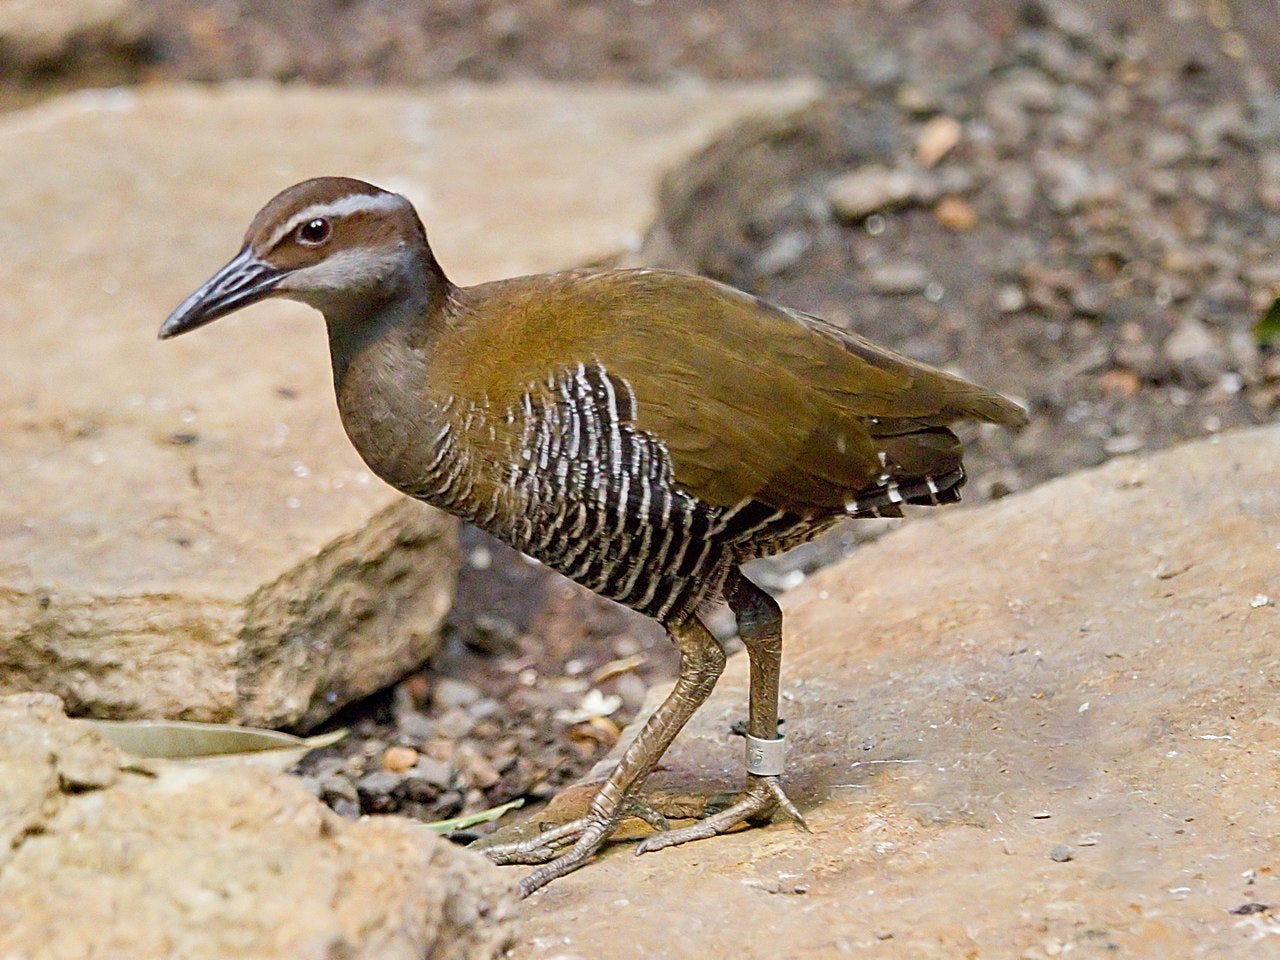 The Guam rail was believed to have gone extinct in 1987